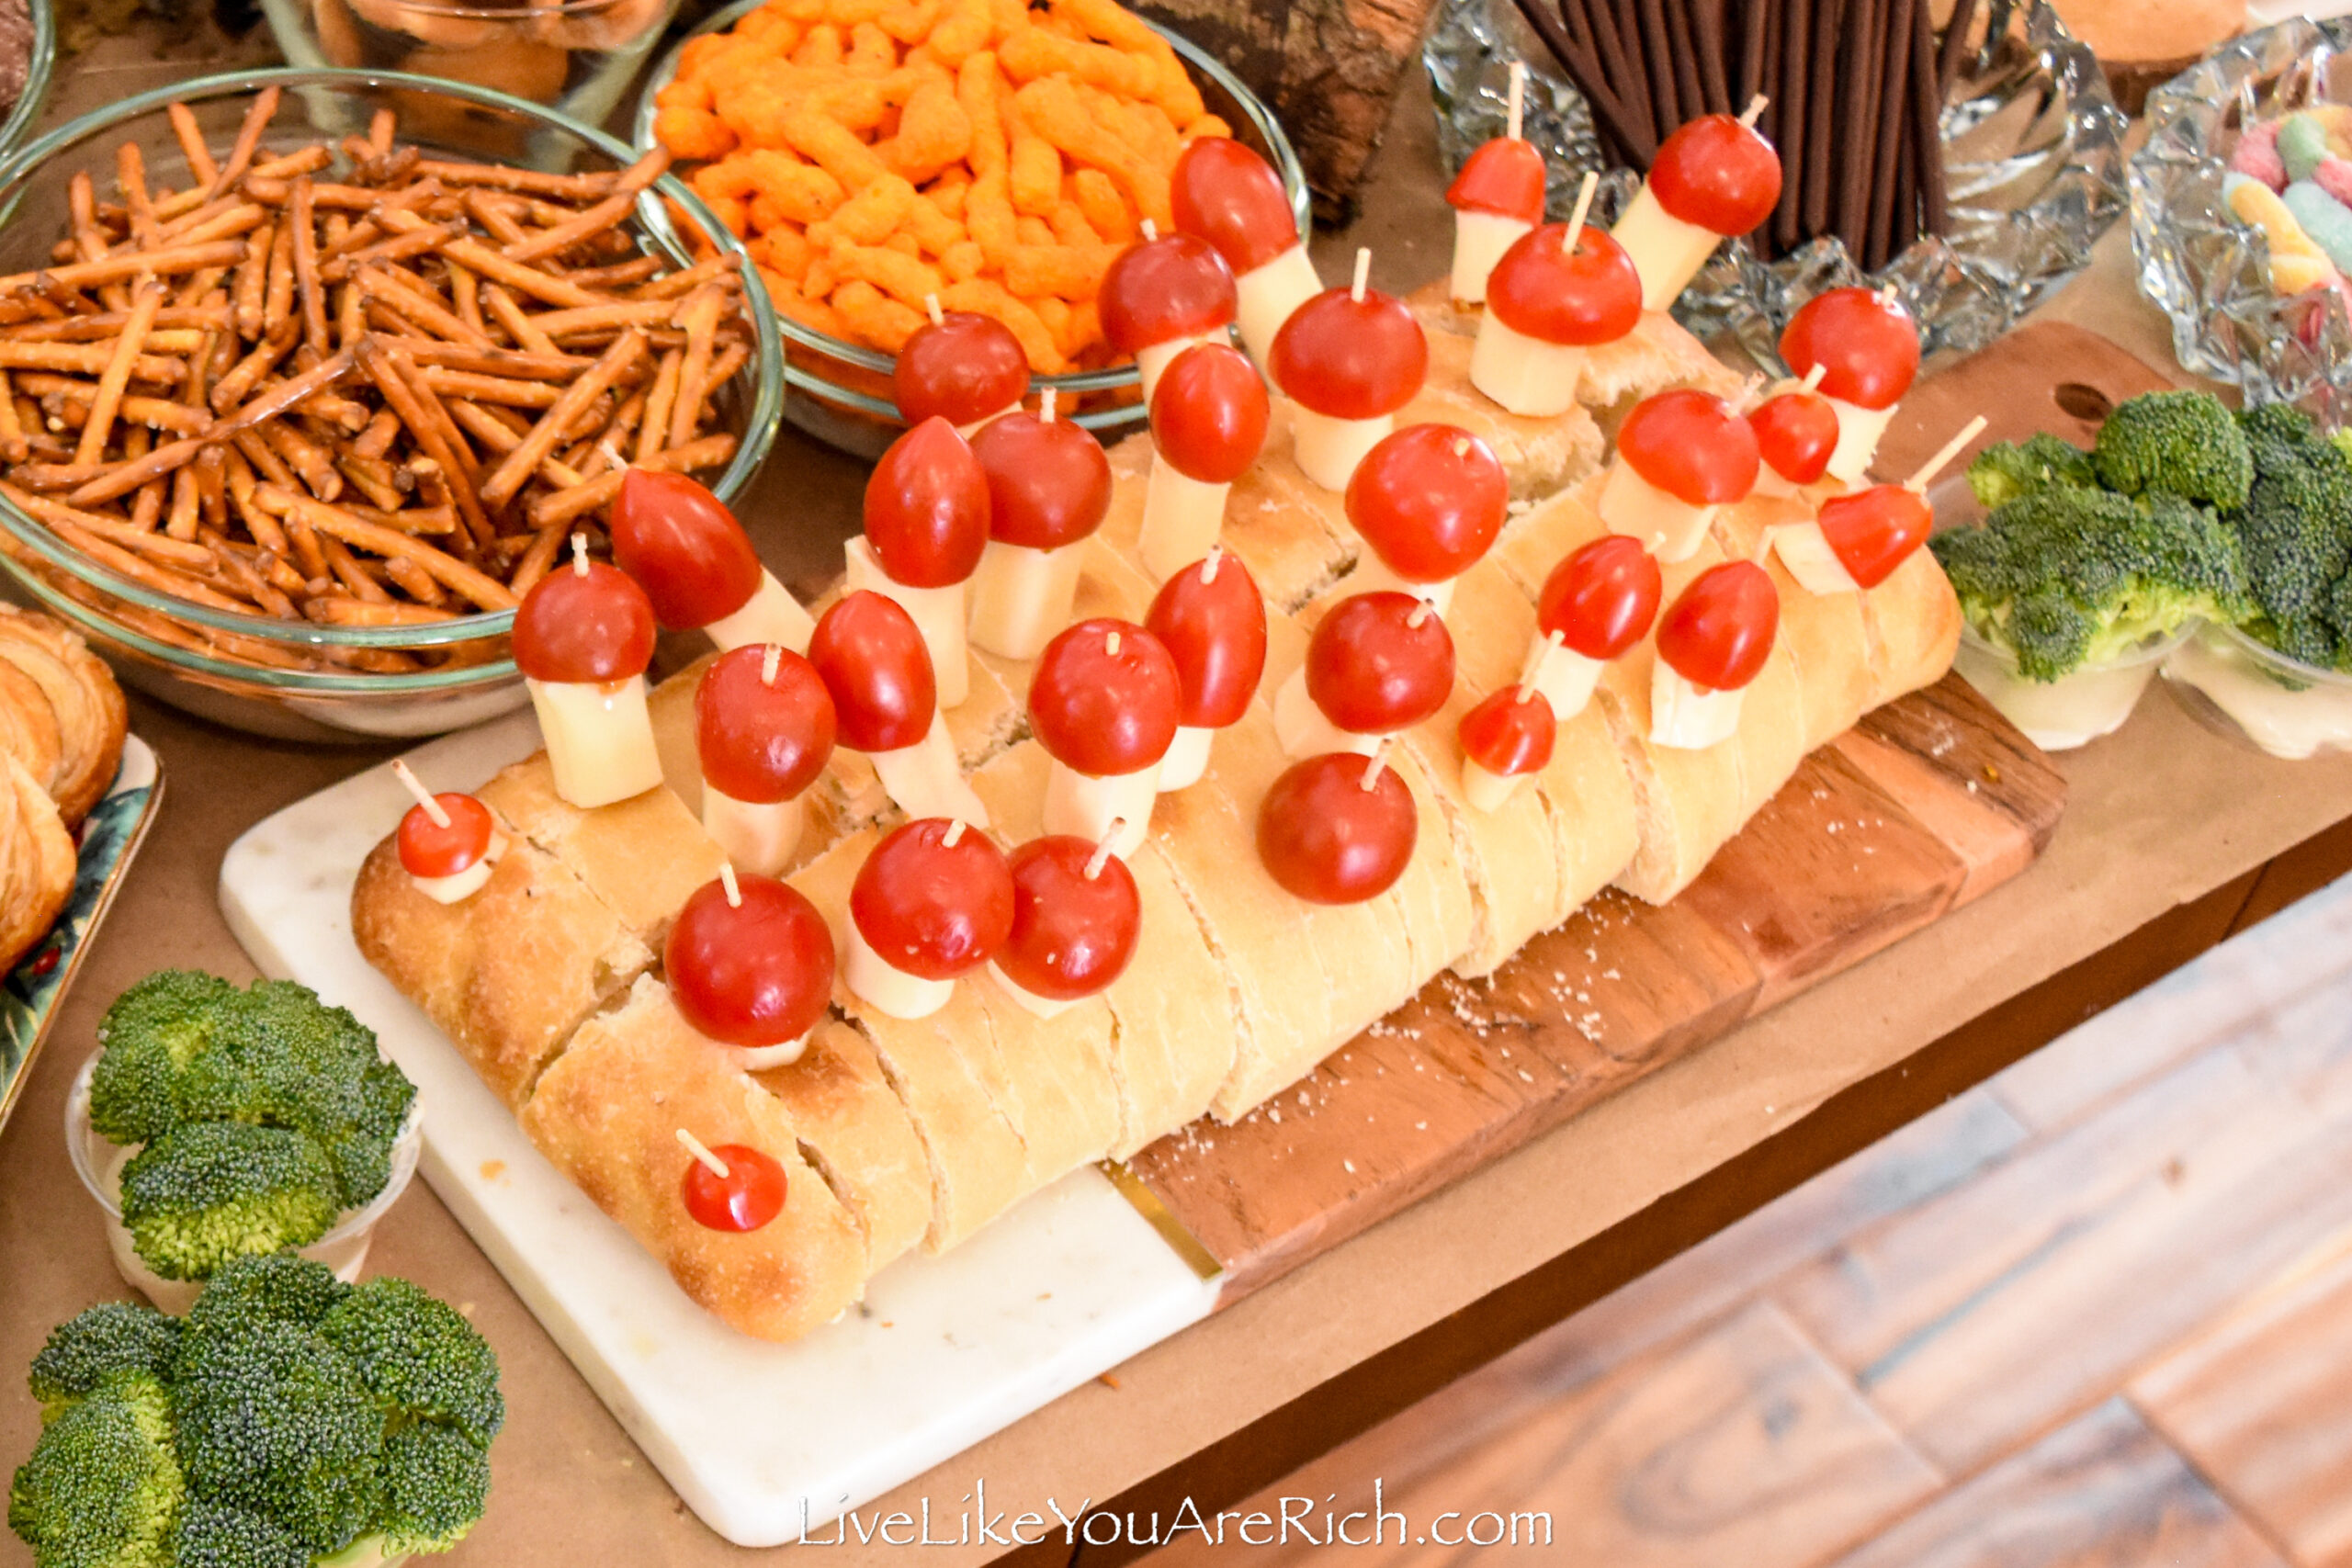 Cheese & Tomatoes Mushroom Display for a Woodland Party